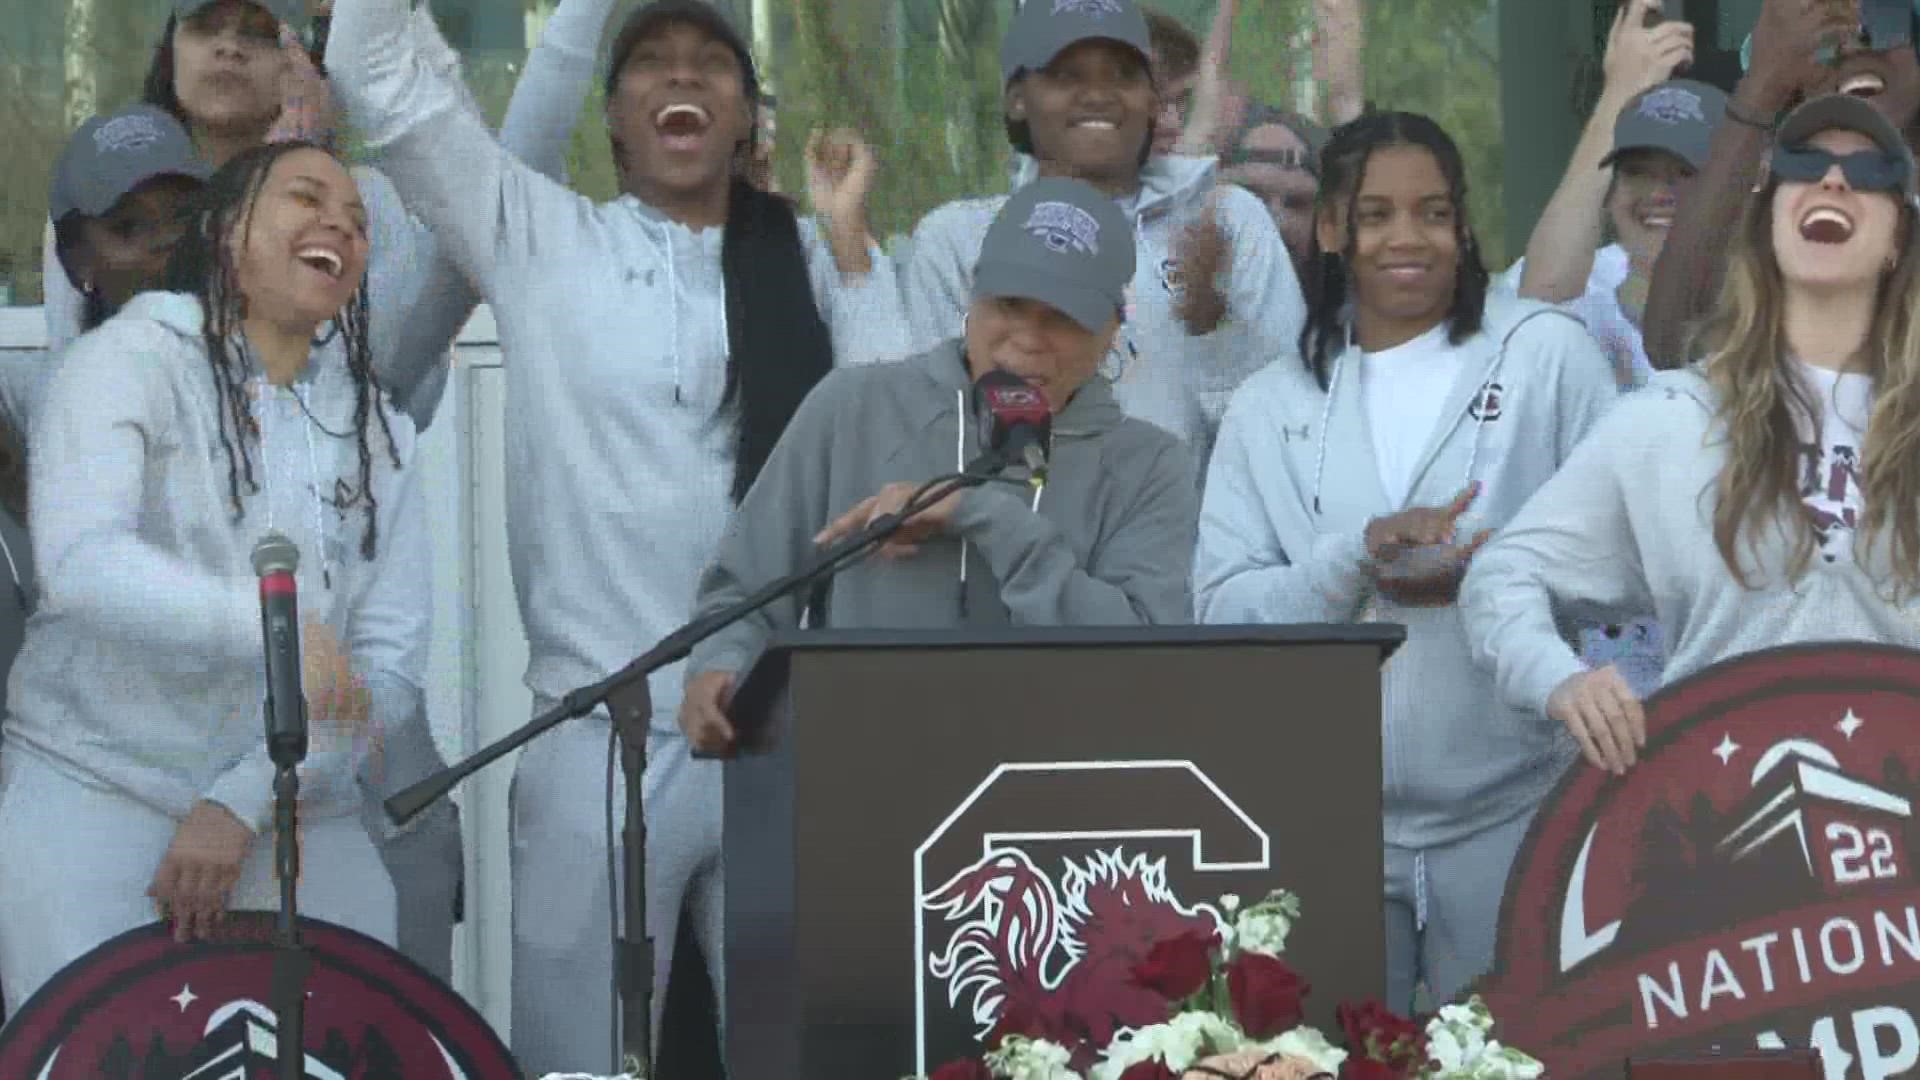 Watch the South Carolina Gamecocks women's basketball team's victory celebration at the Colonial Life Arena.